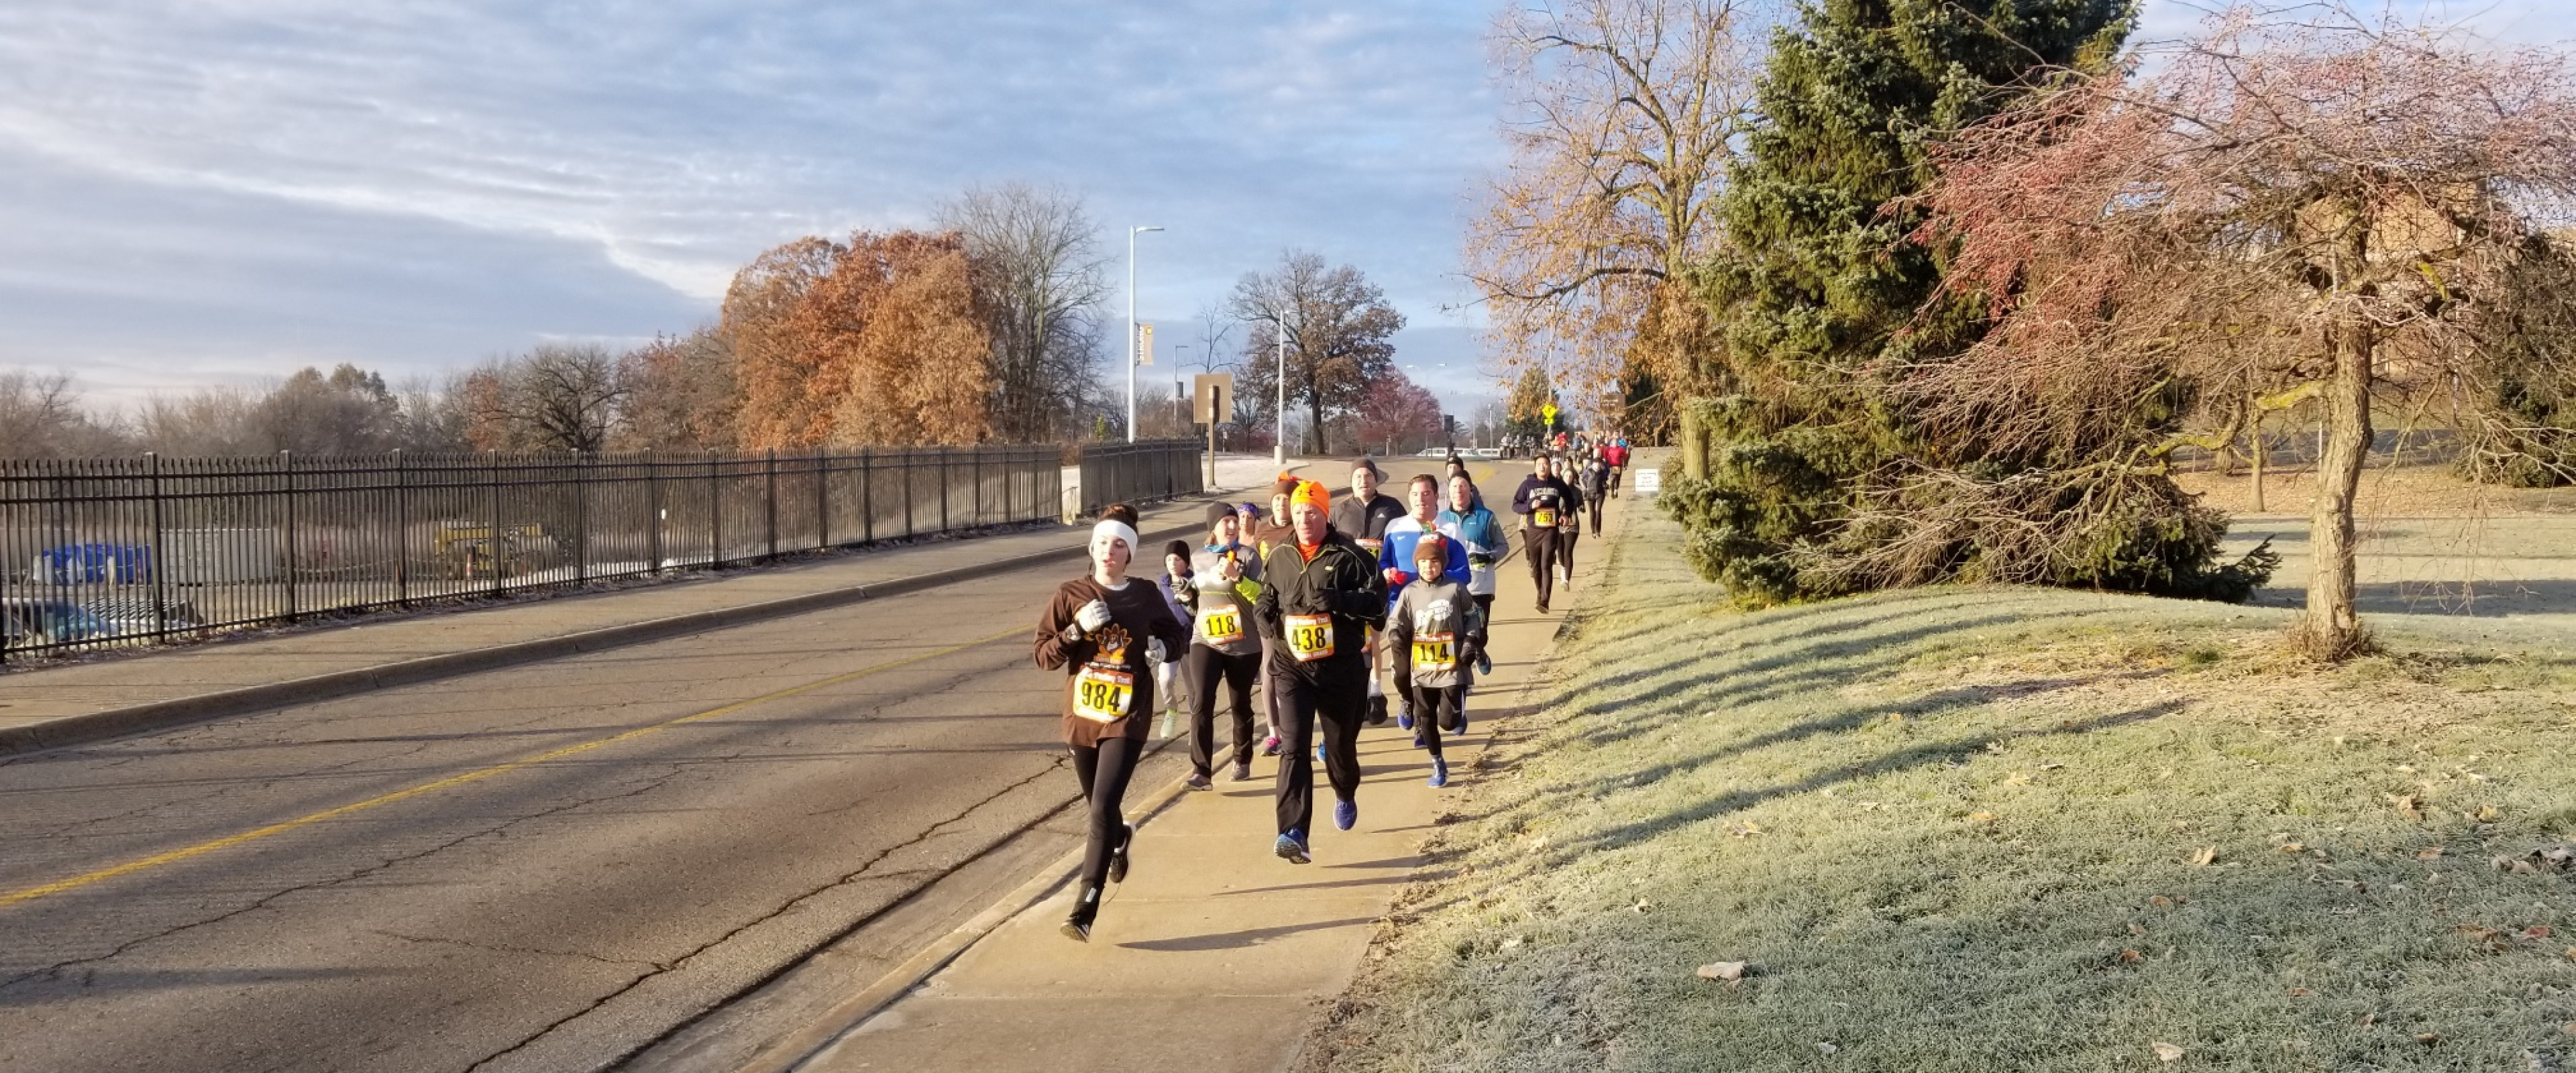 Participants running the Turkey Trot race on the course